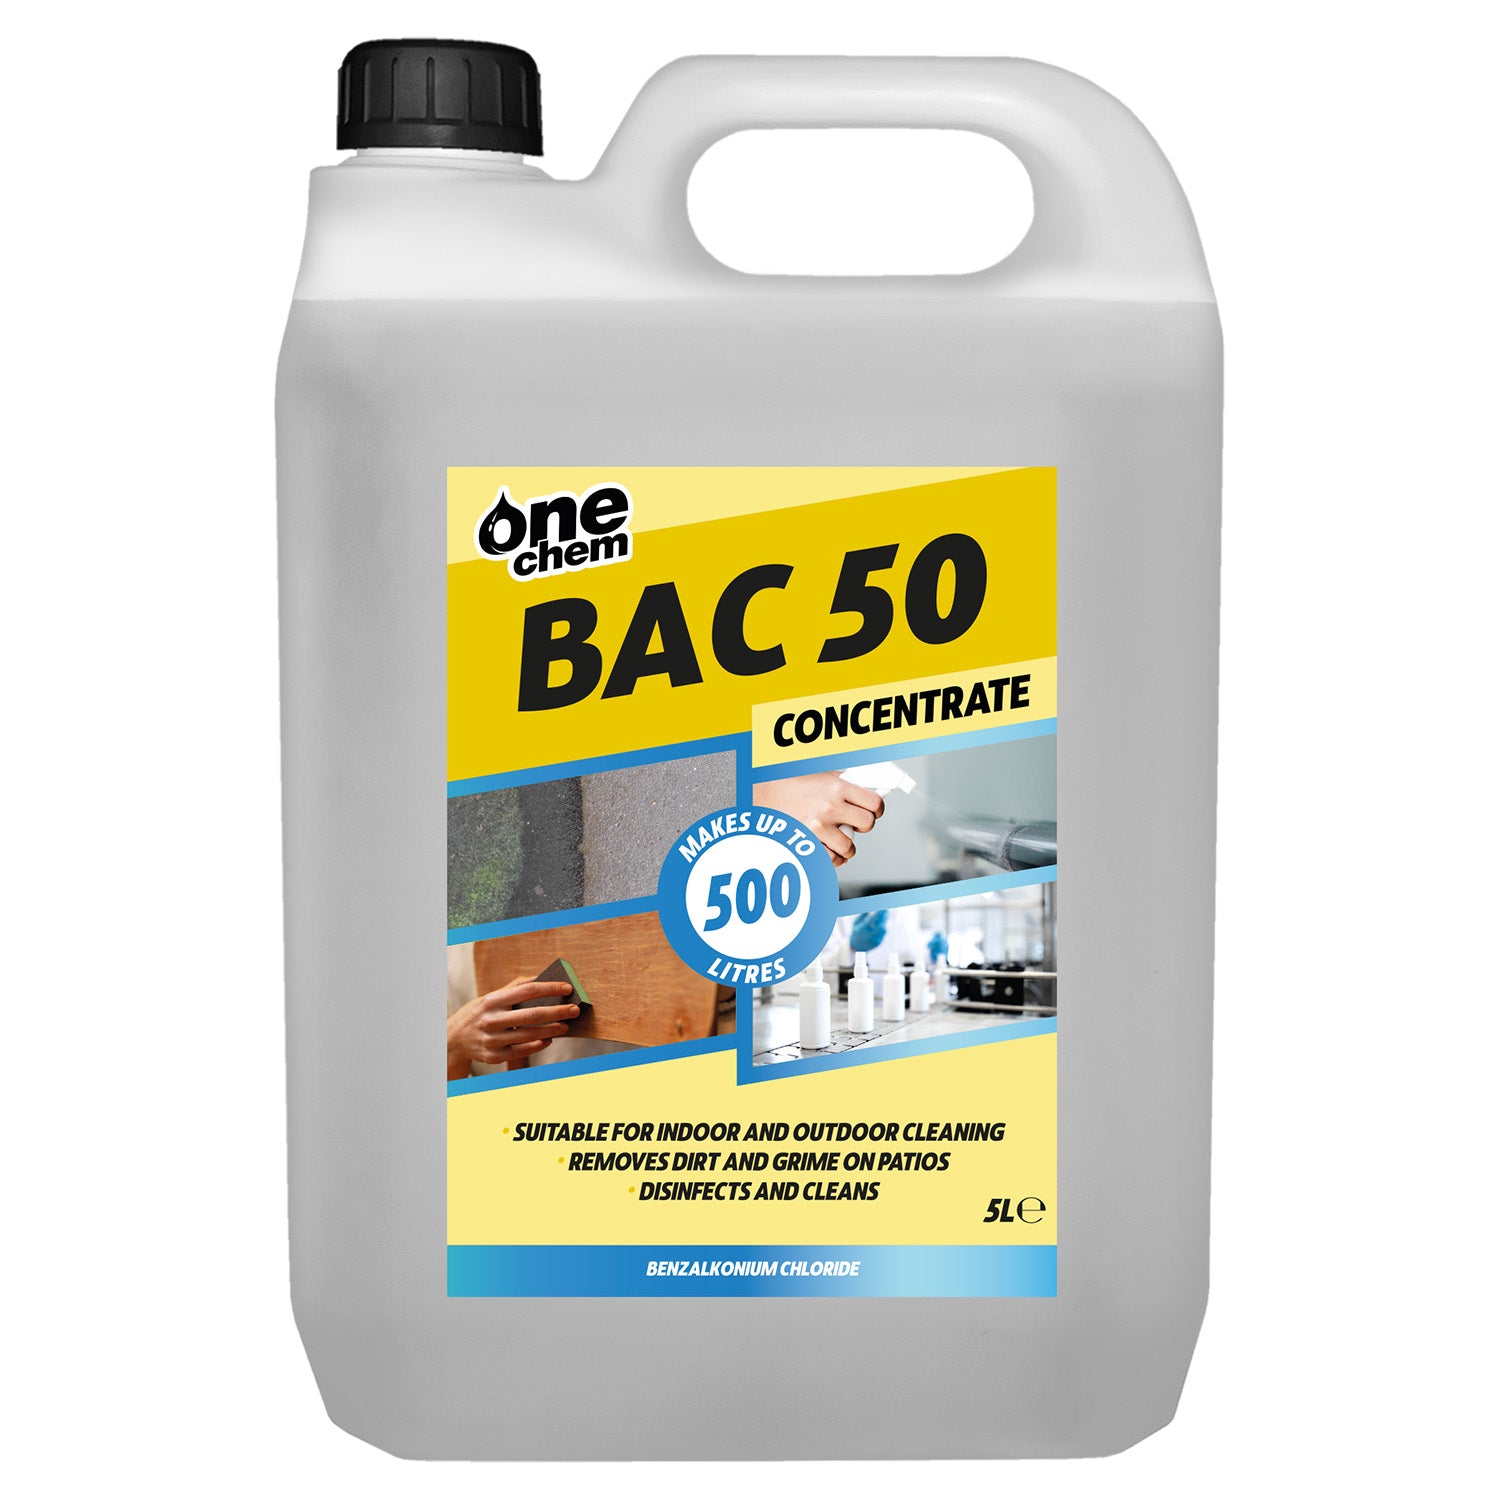 One Chem - BAC 50 Benzalkonium Chloride Concentrated 5L with 5L Sprayer